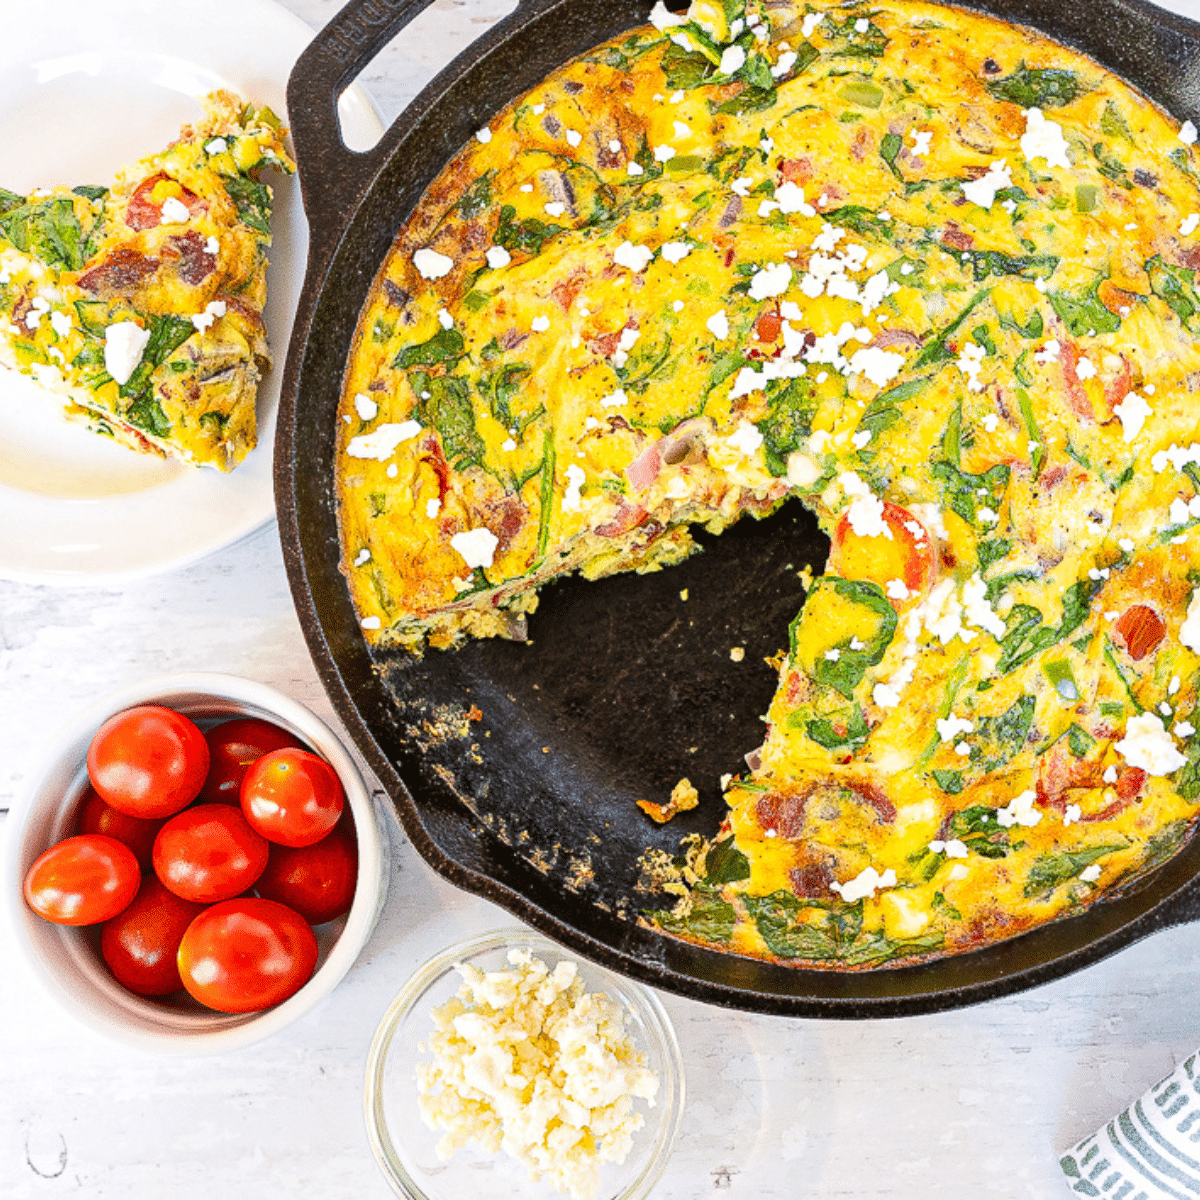 Keto bacon and vegetable frittata in a black skillet with a slice removed, served alongside a small baking dish with cherry tomatoes and cheese, on a white background.